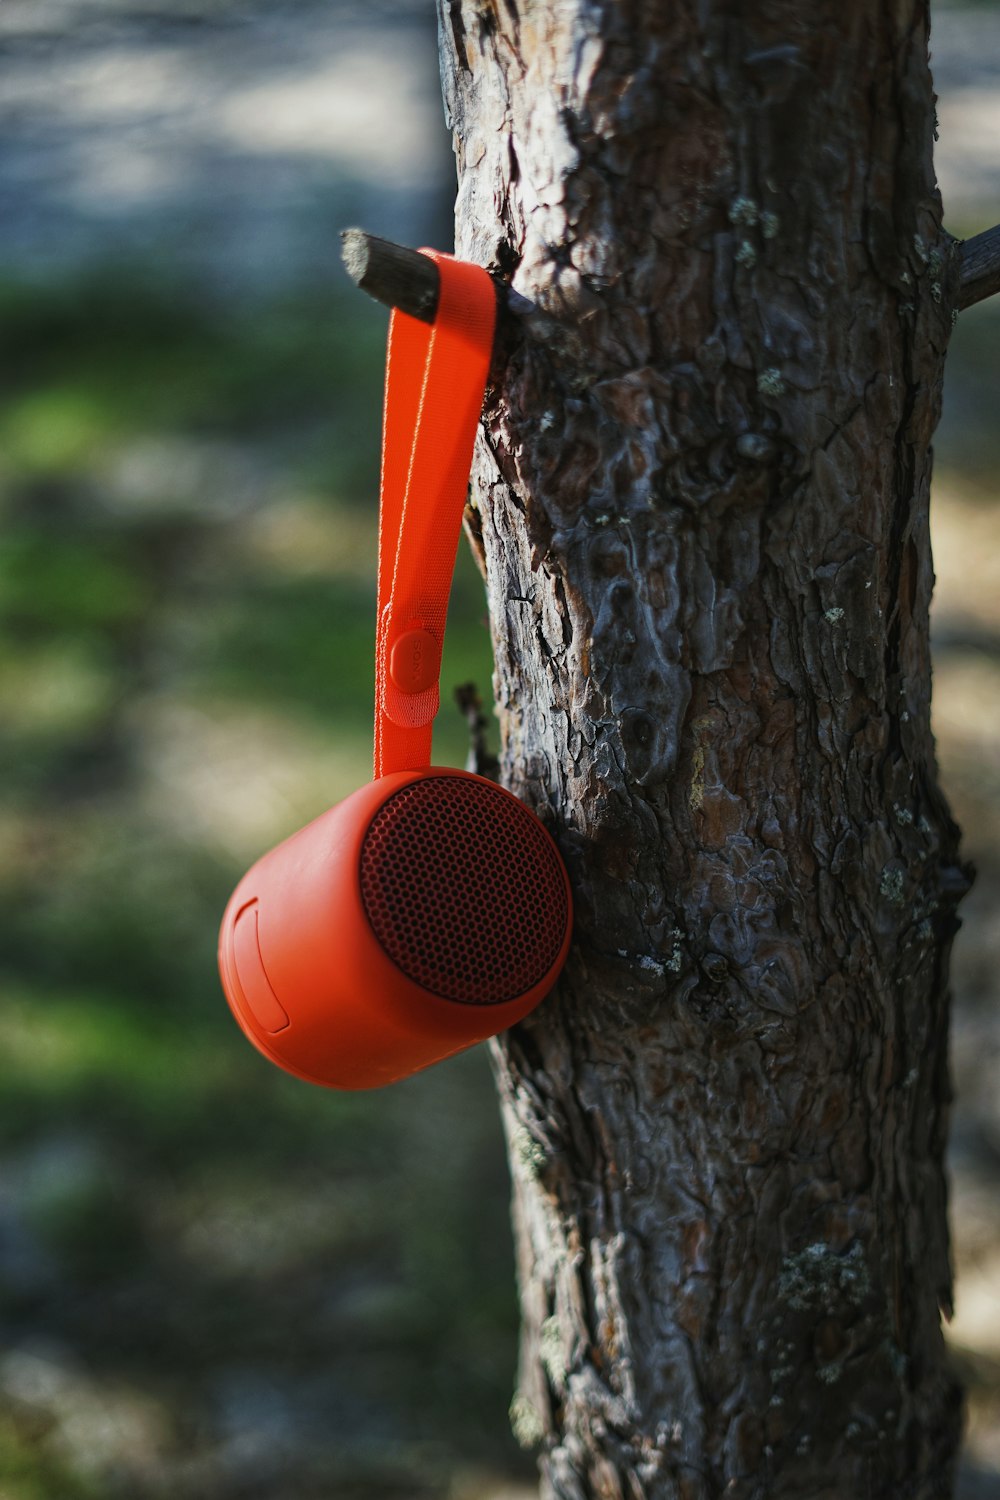 orange and black plastic watering can hanging on brown tree during daytime